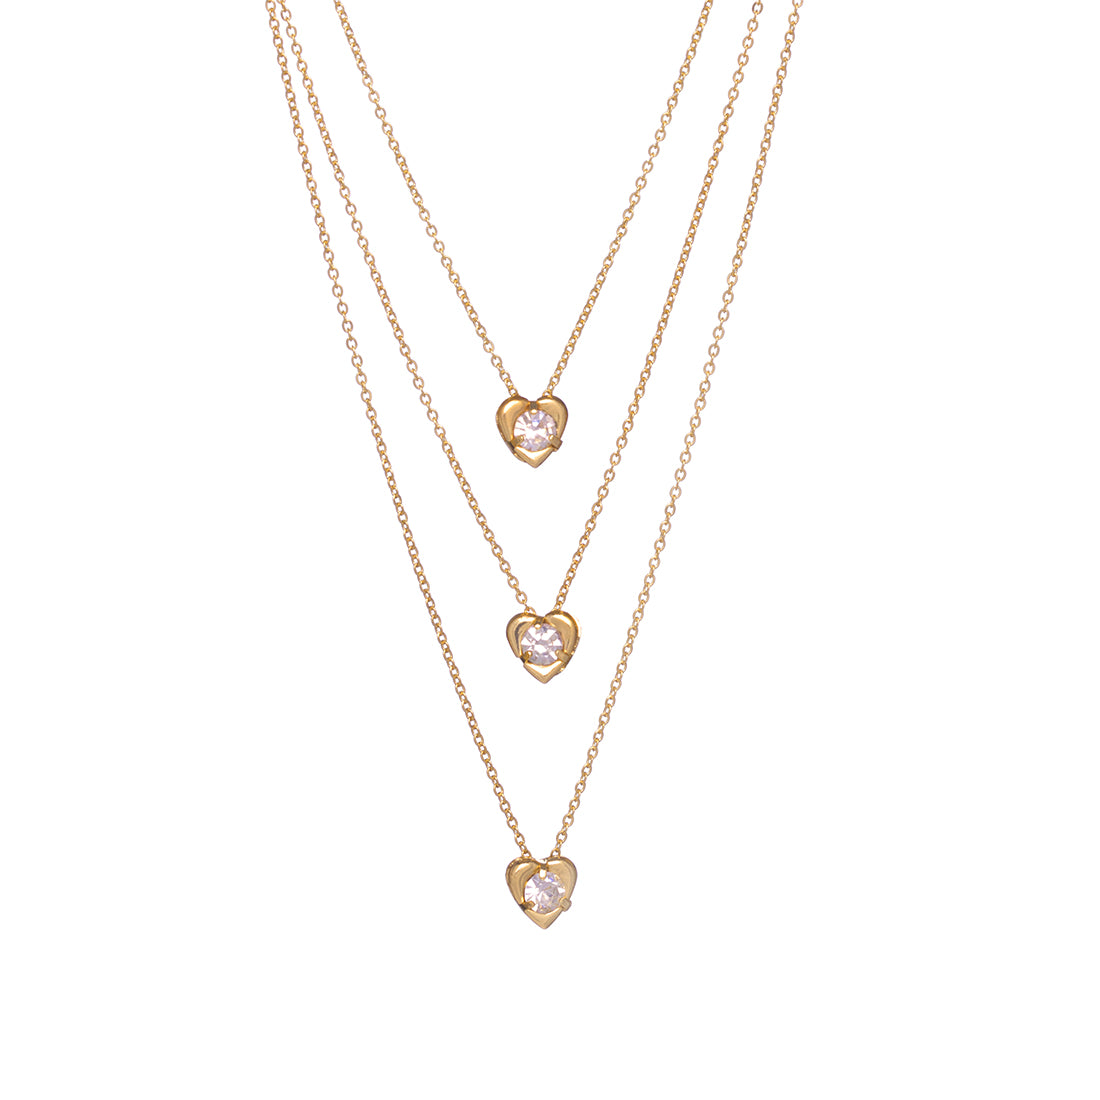 Three-Layered Gold Heart-Shaped Pendant Necklace